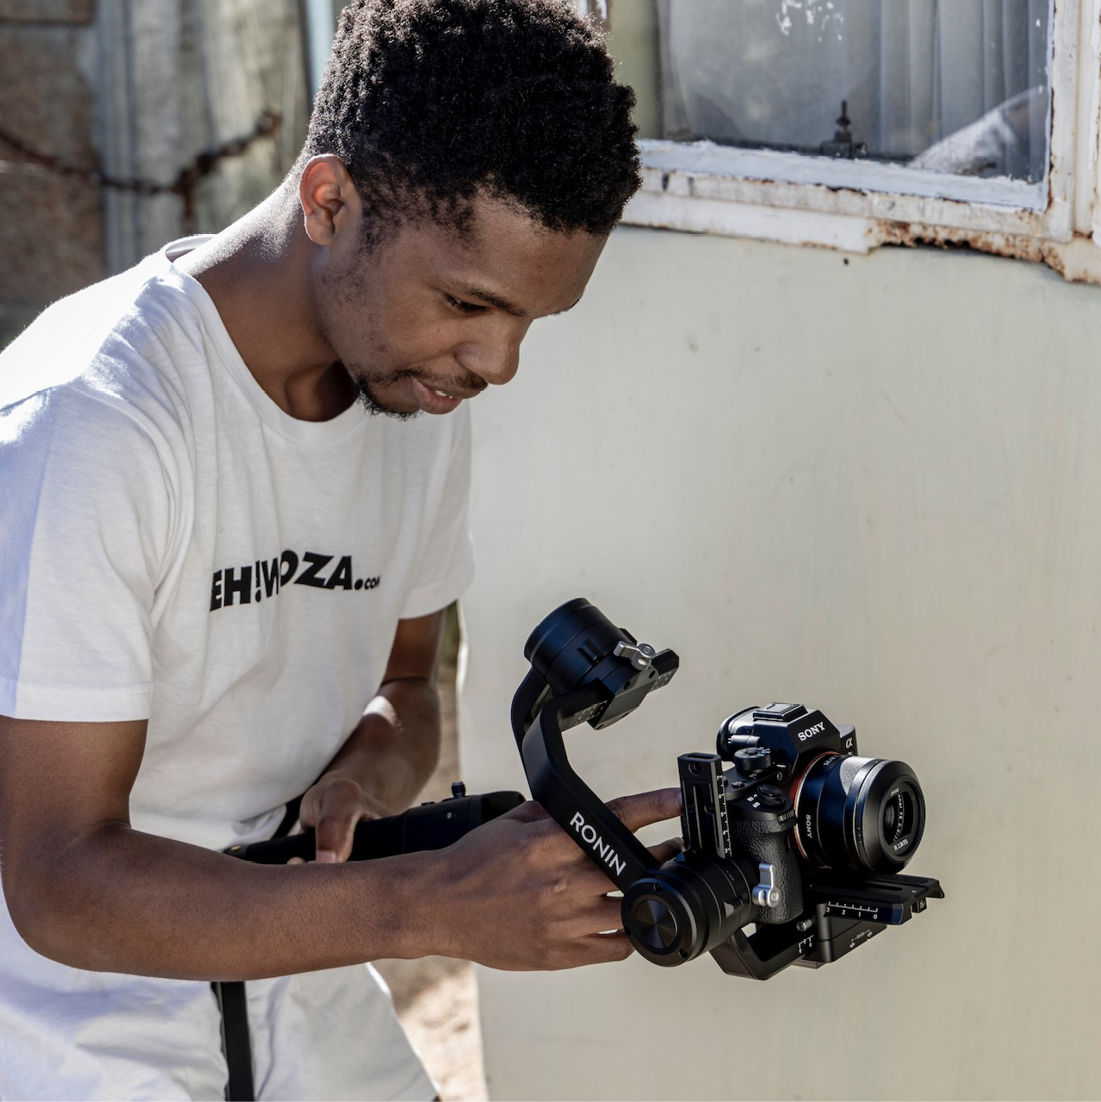 Young filmmakers from Khayelitsha are creating short documentaries about COVID-19. Photo: Eh!Woza